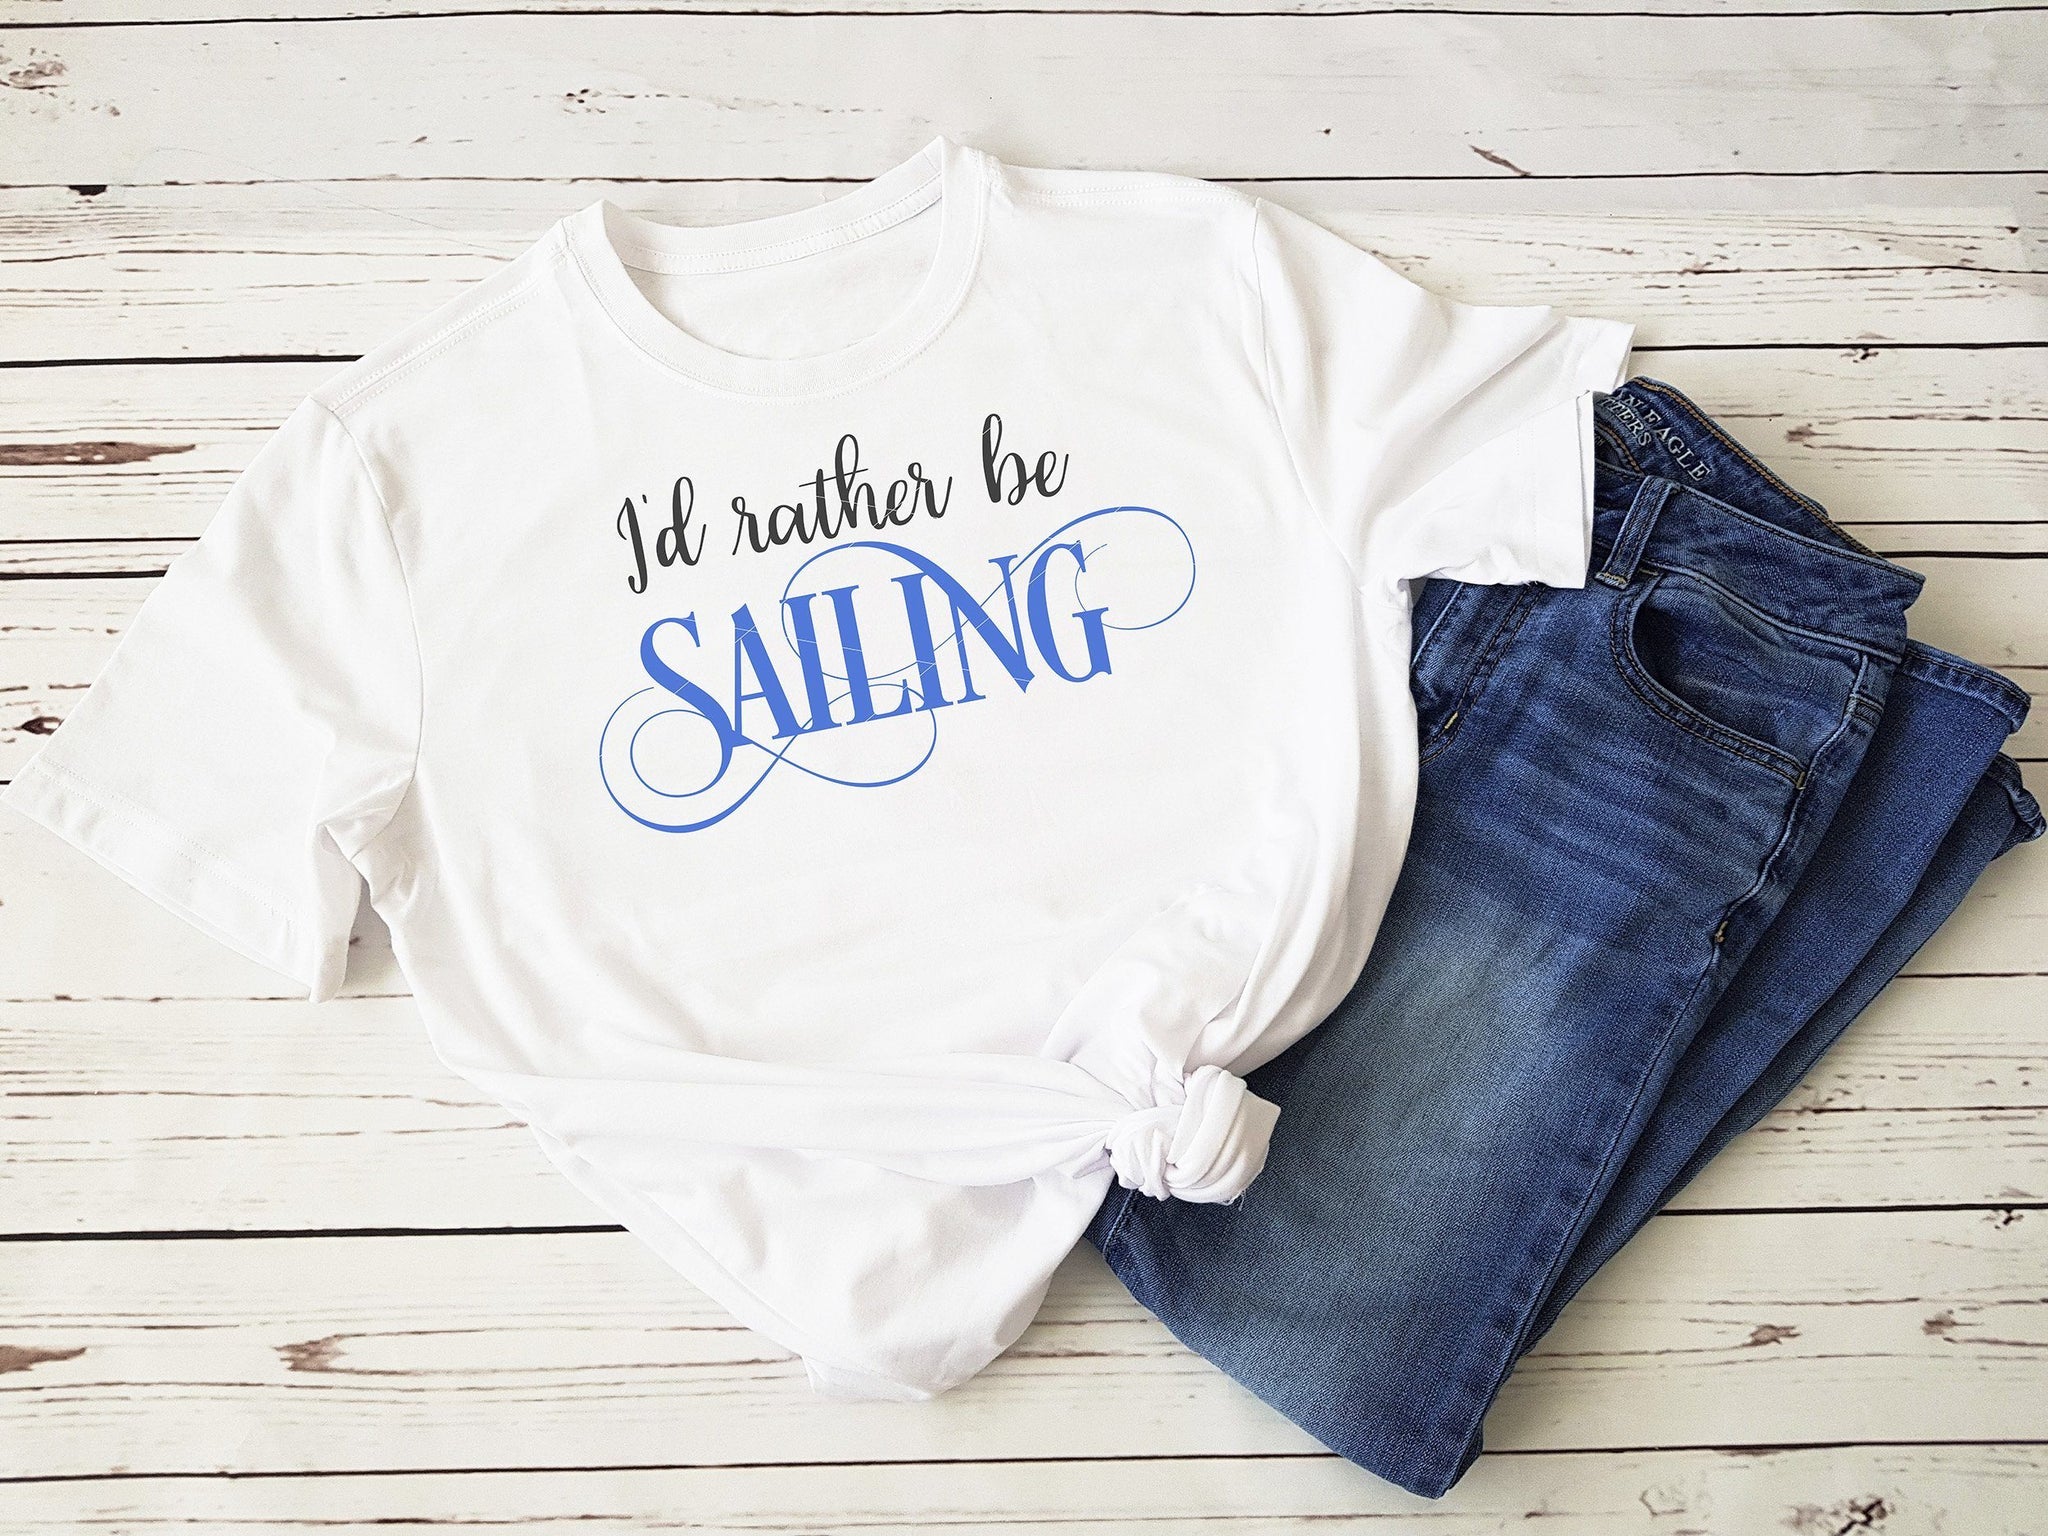 I'd Rather Be Sailing SVG - Commercial Use SVG Files for Cricut & Silhouette